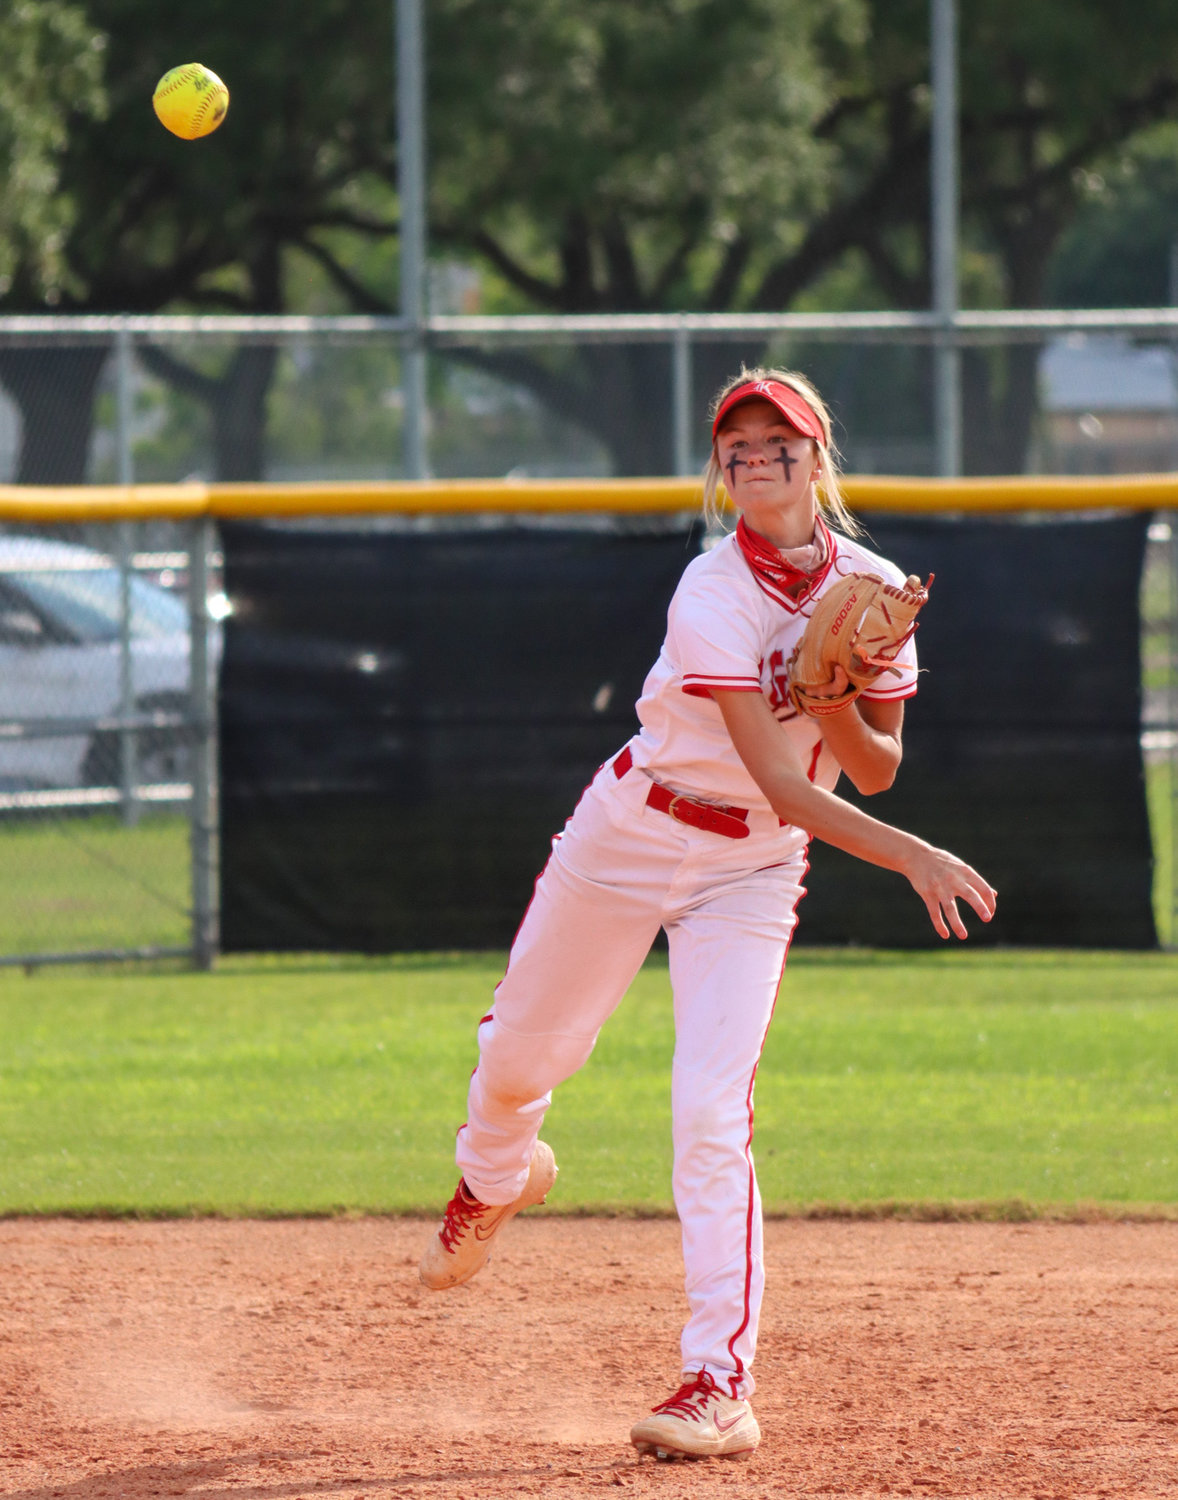 Katy High sophomore shortstop Peyton Watson relays a throw during Game 1 of the team’s area playoff series against Houston Heights on Friday, May 7, at Katy High.